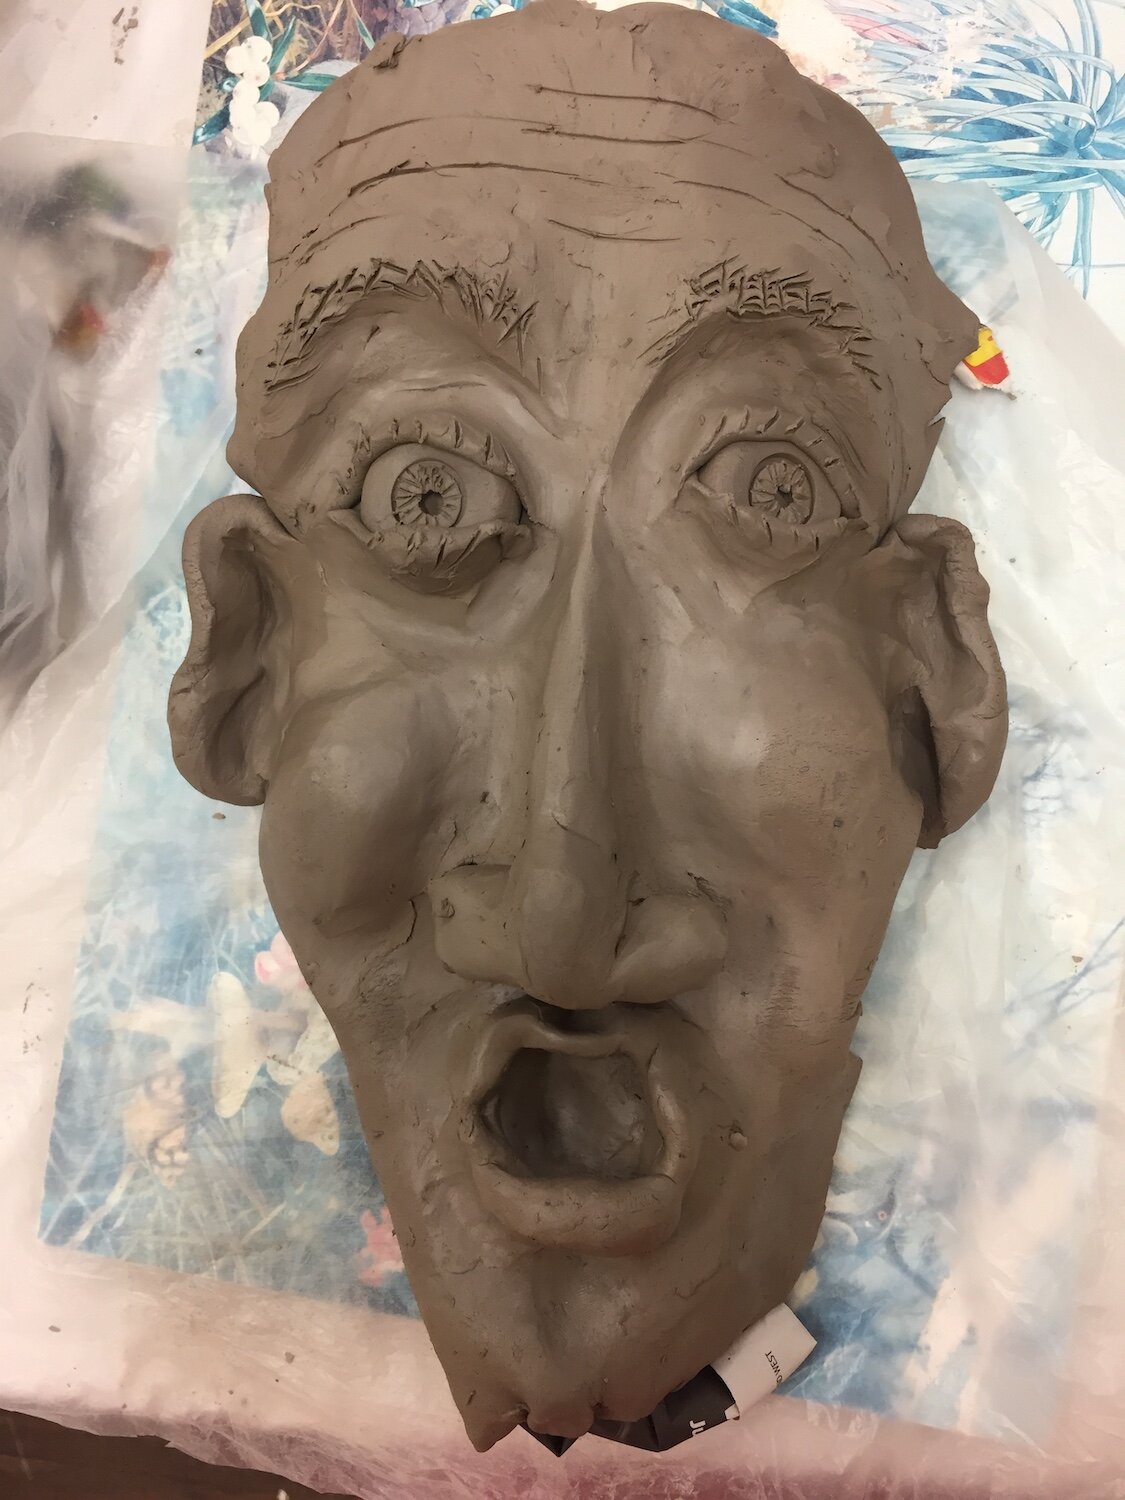 Professional Development Activity Away Day, Perth, Drawing and Clay, Surprise Expression